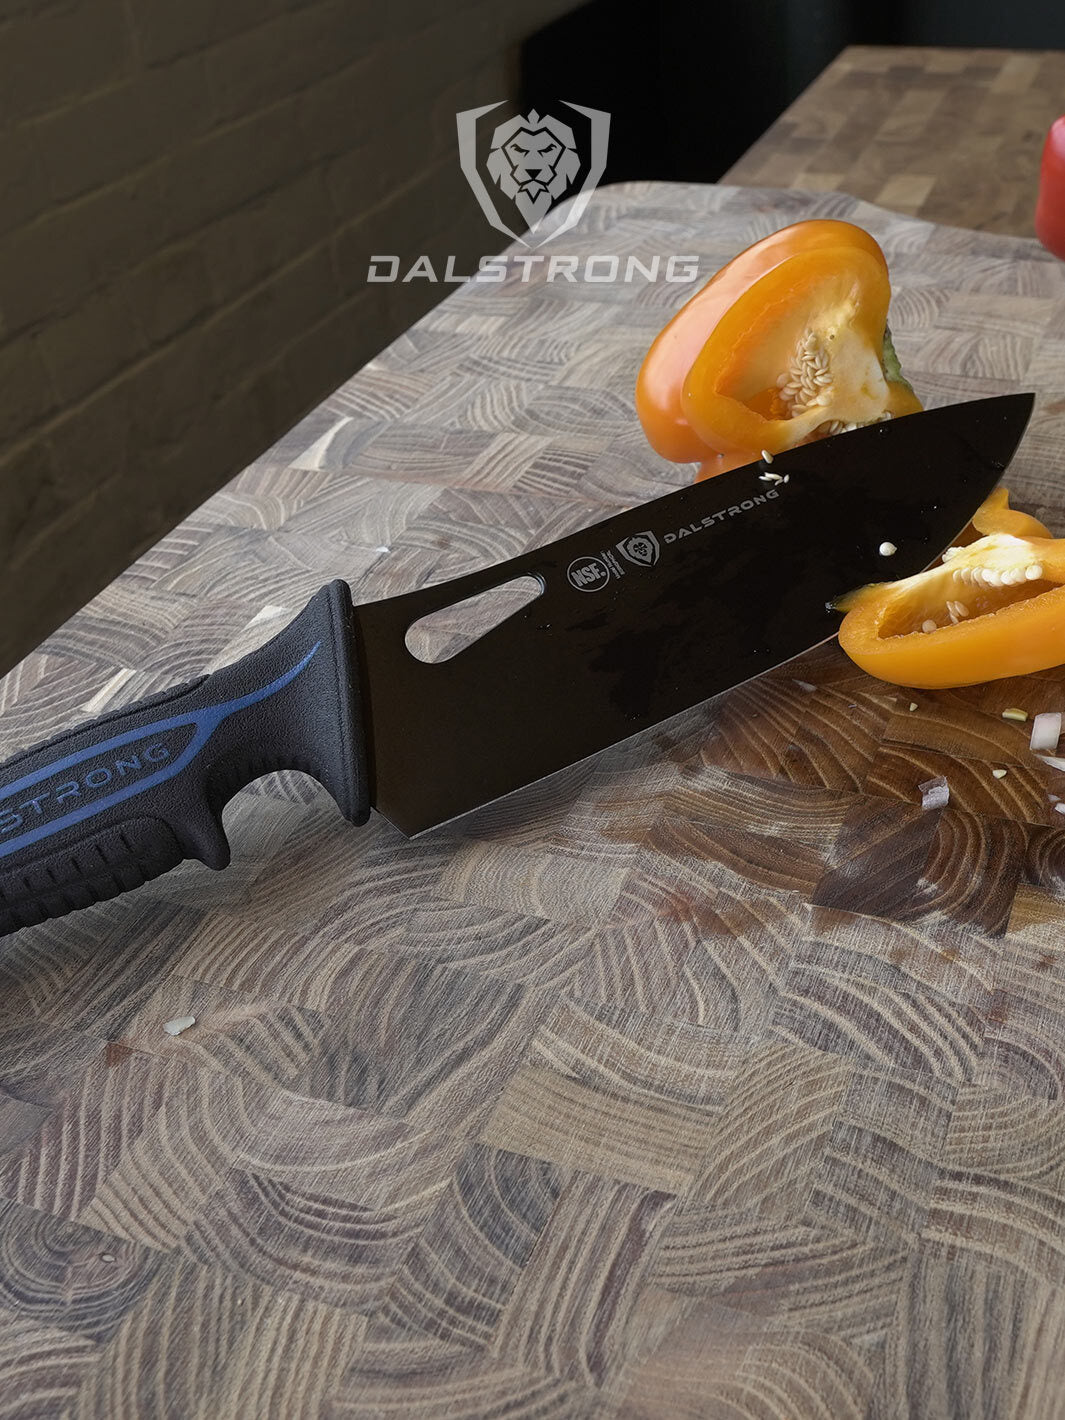 Types Of Professional Knife Sharpeners – Dalstrong